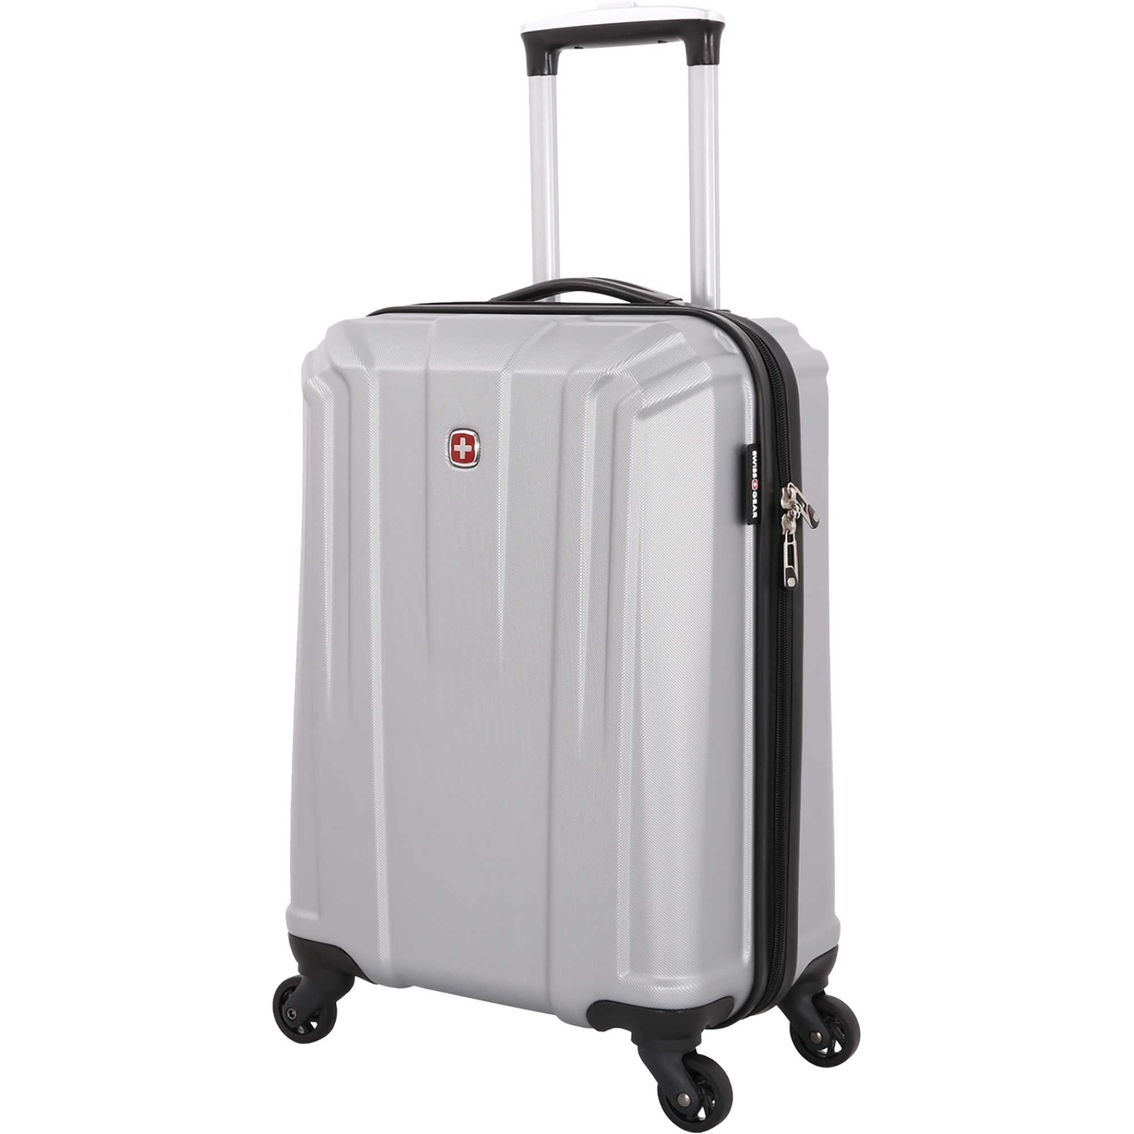 Carry-On 20-Inch SwissGear 3750 Hardside Expandable Luggage with Spinner Wheels Silver 